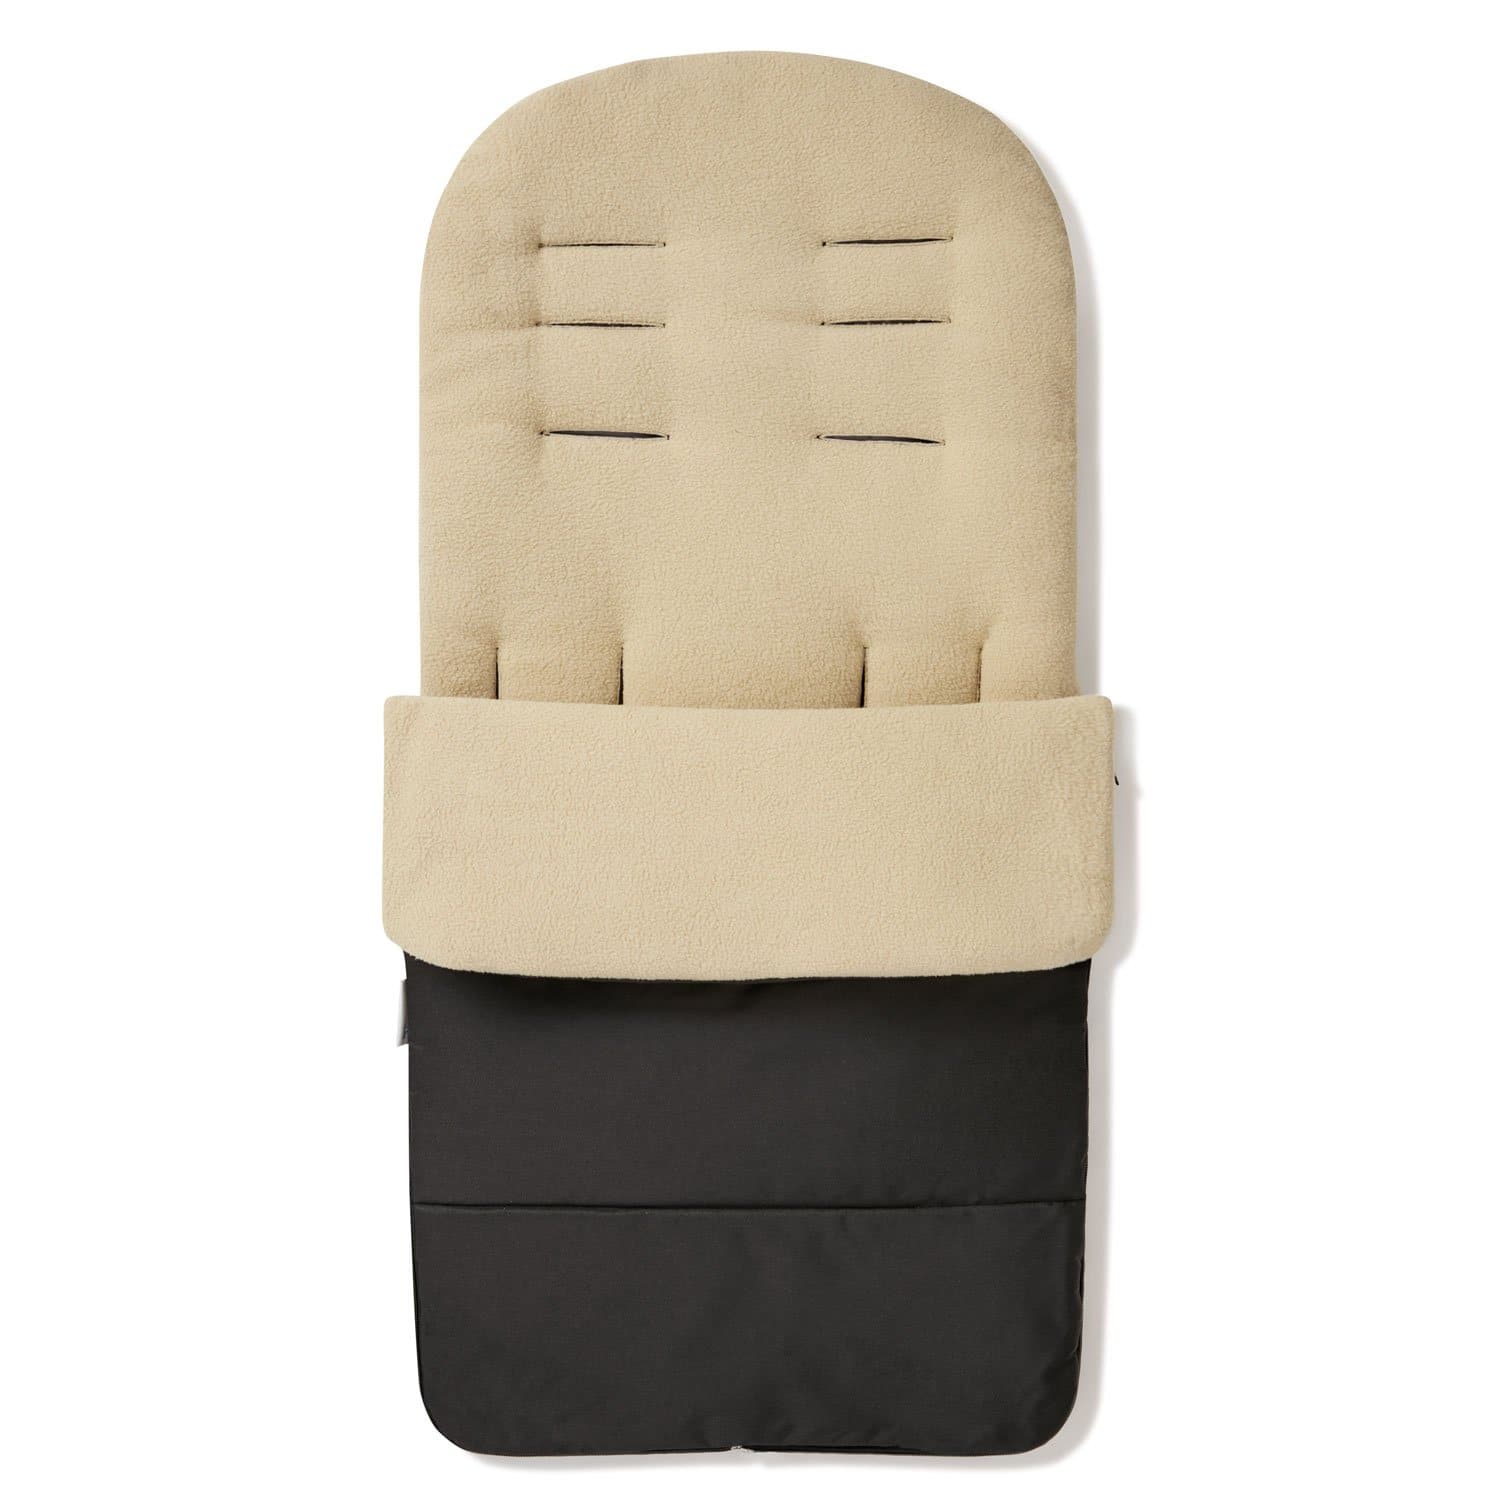 Premium Footmuff / Cosy Toes Compatible with Uppababy - Desert Sand / Fits All Models | For Your Little One